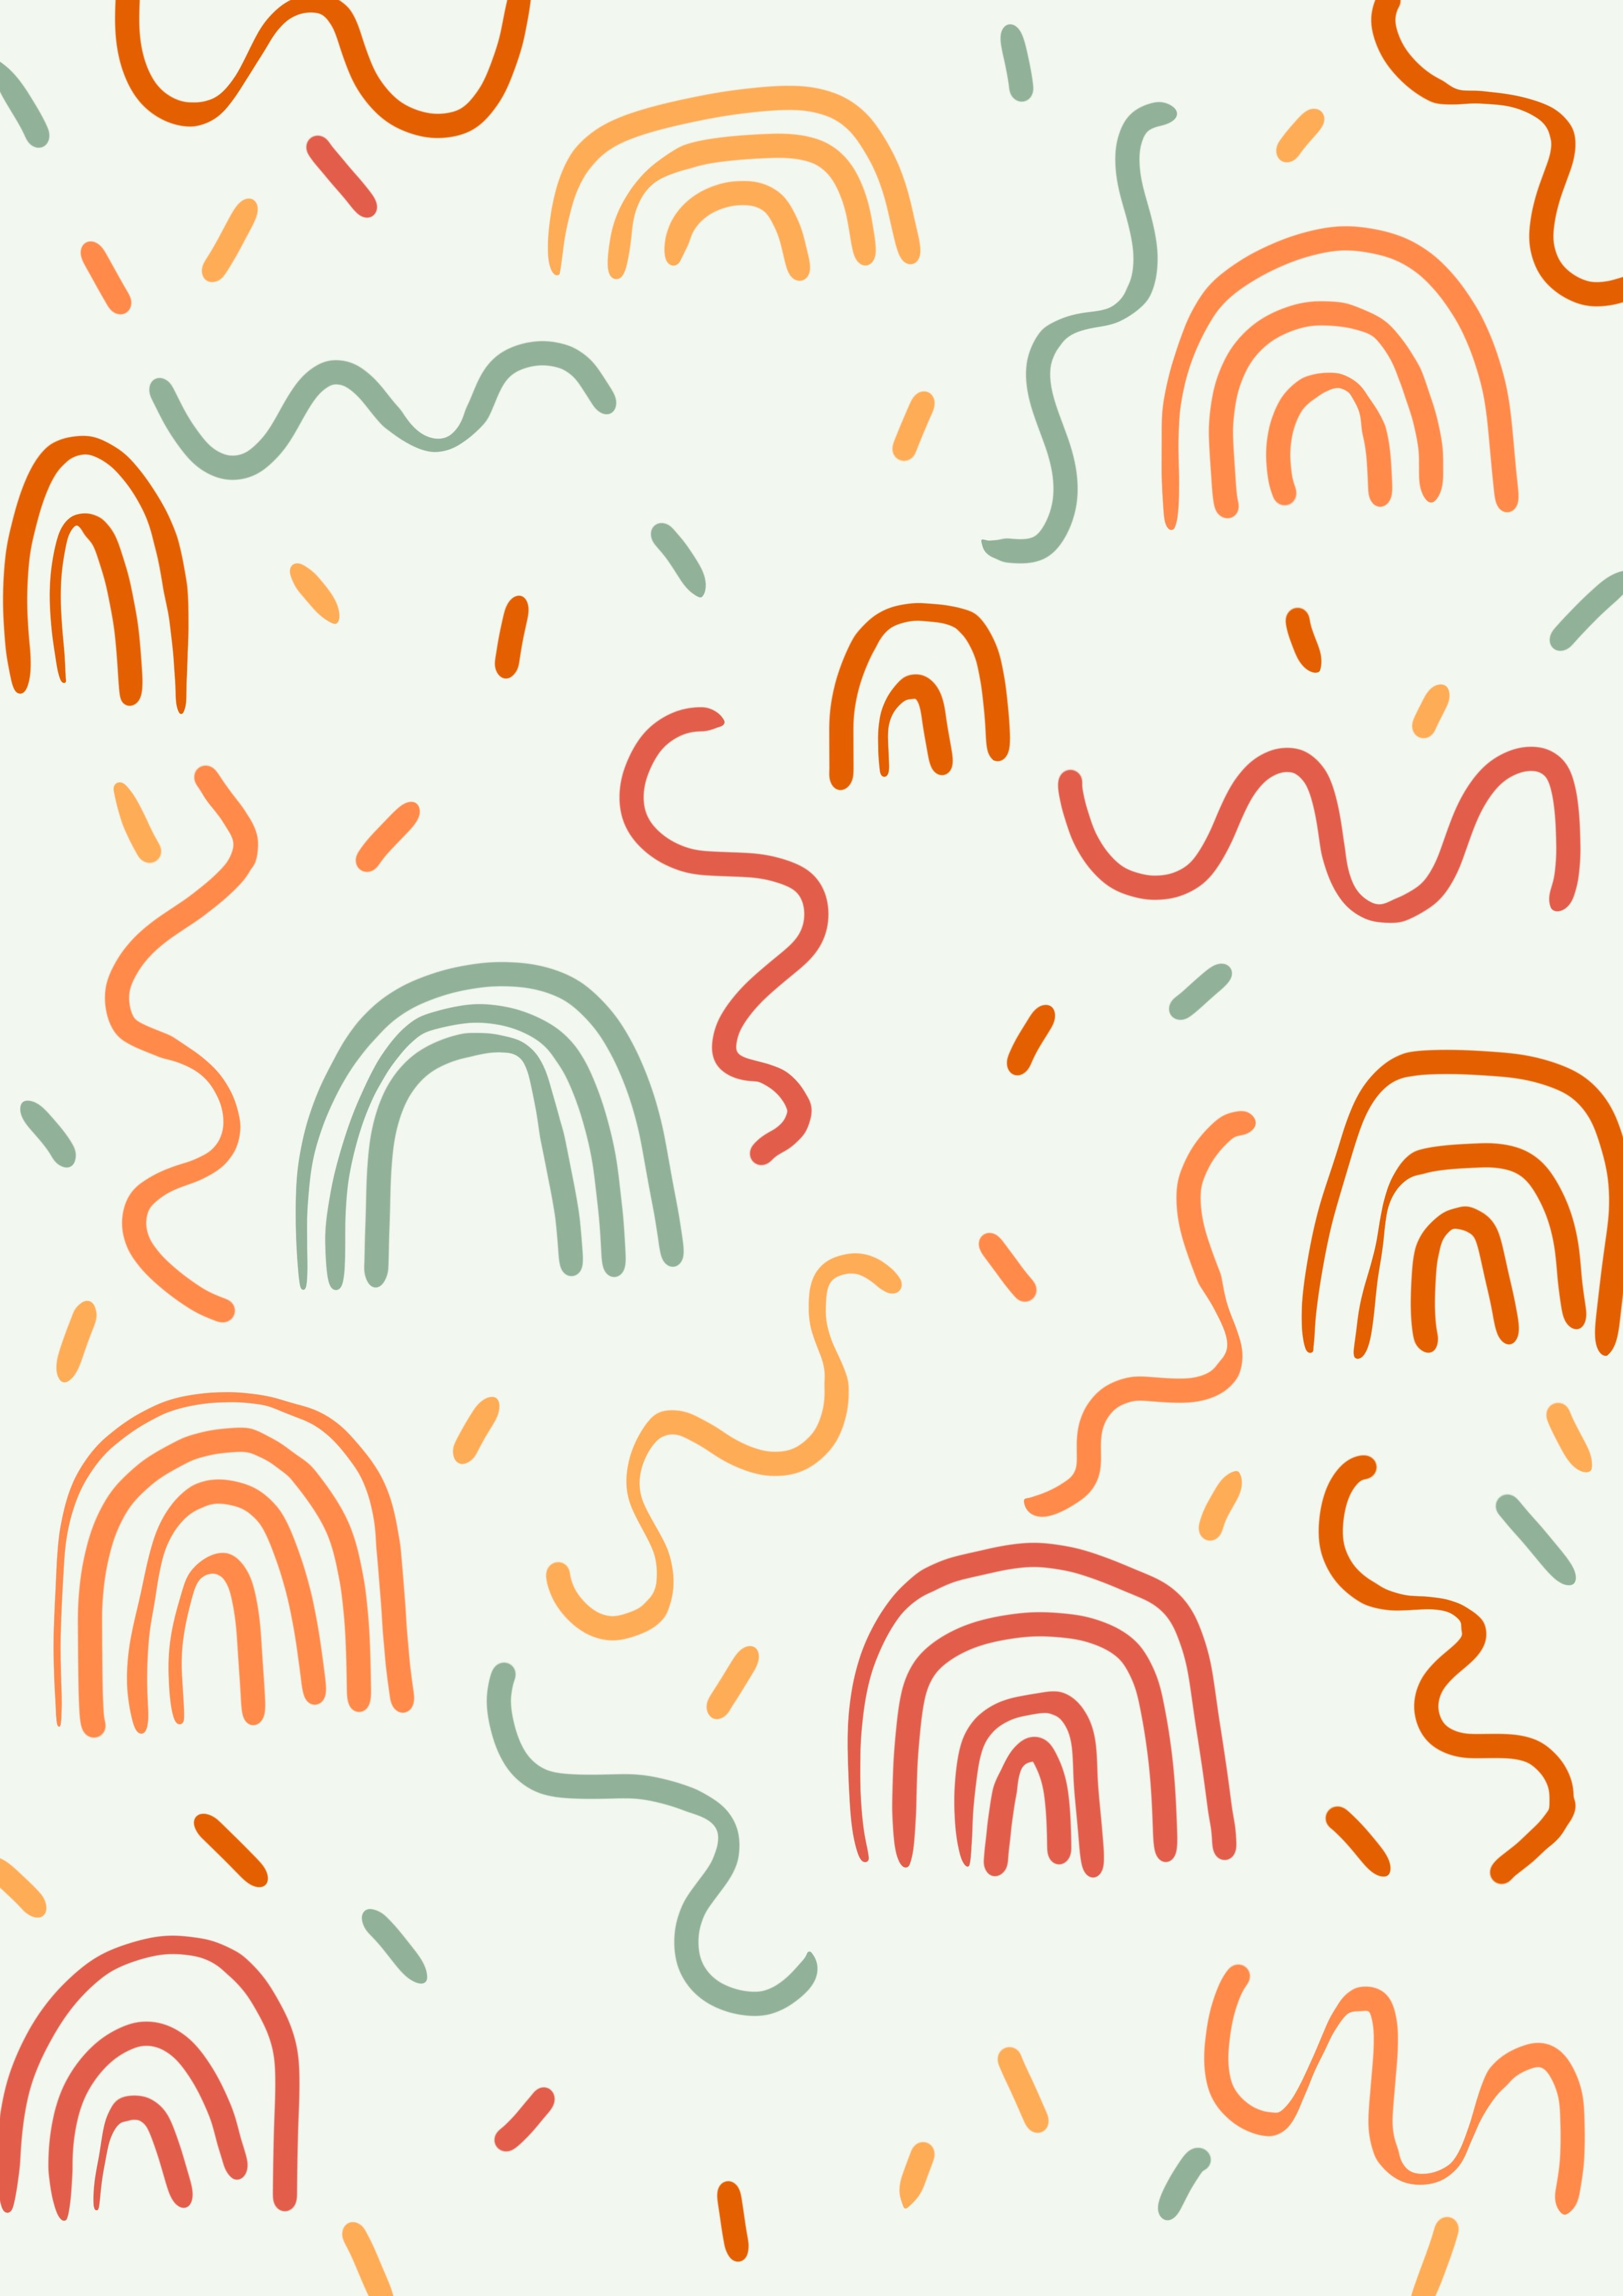 A pattern of rainbows and lines on white background - Pattern